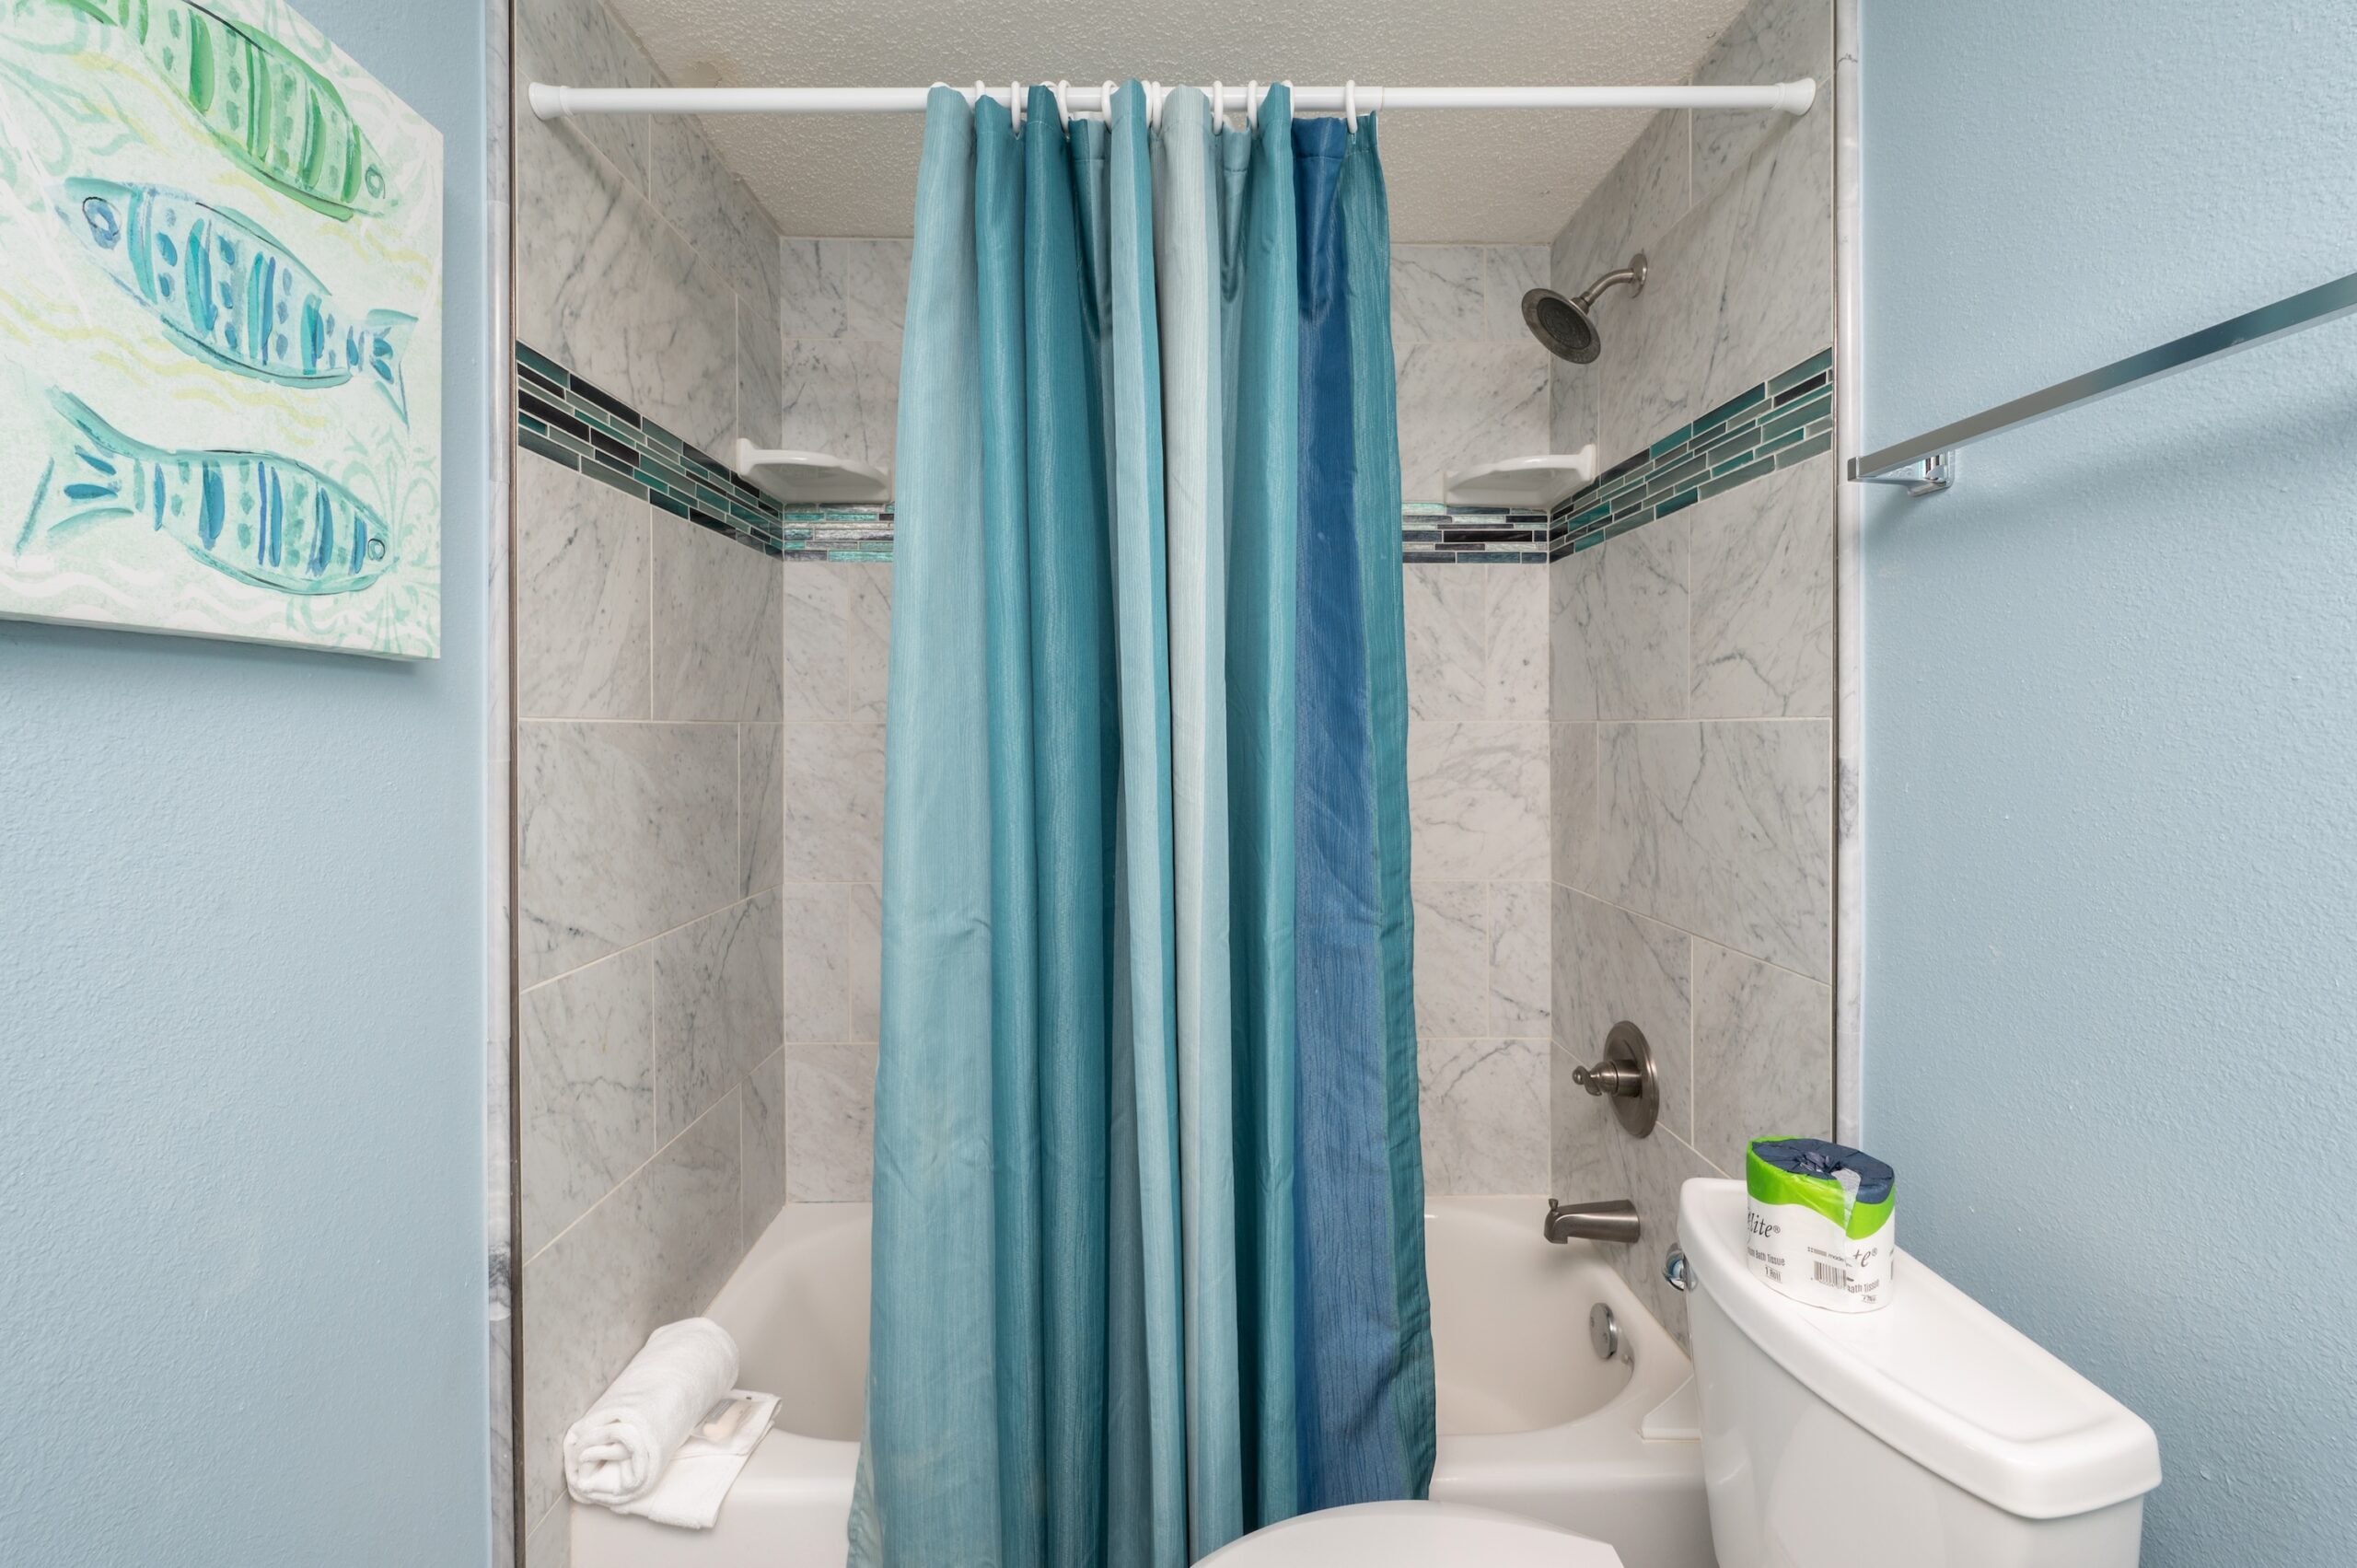 Striking tile accents in main bathroom in our beach vacation rental